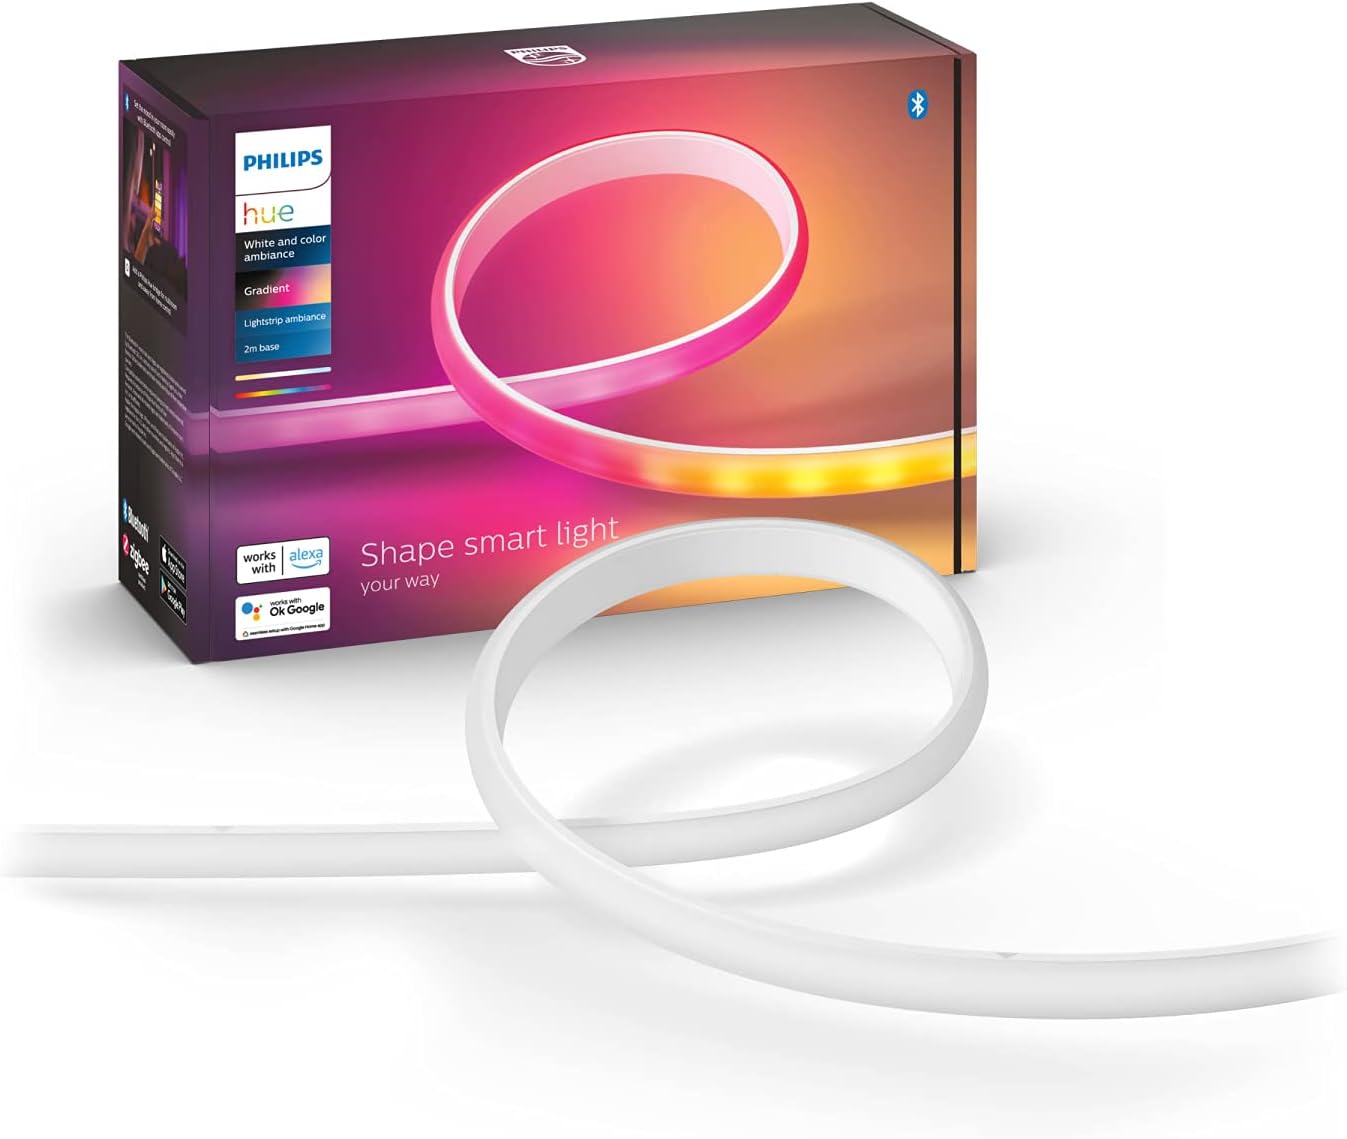 Philips Hue Gradient Ambiance LED Lightstrip 2m Basis, Weiß, 929002994901